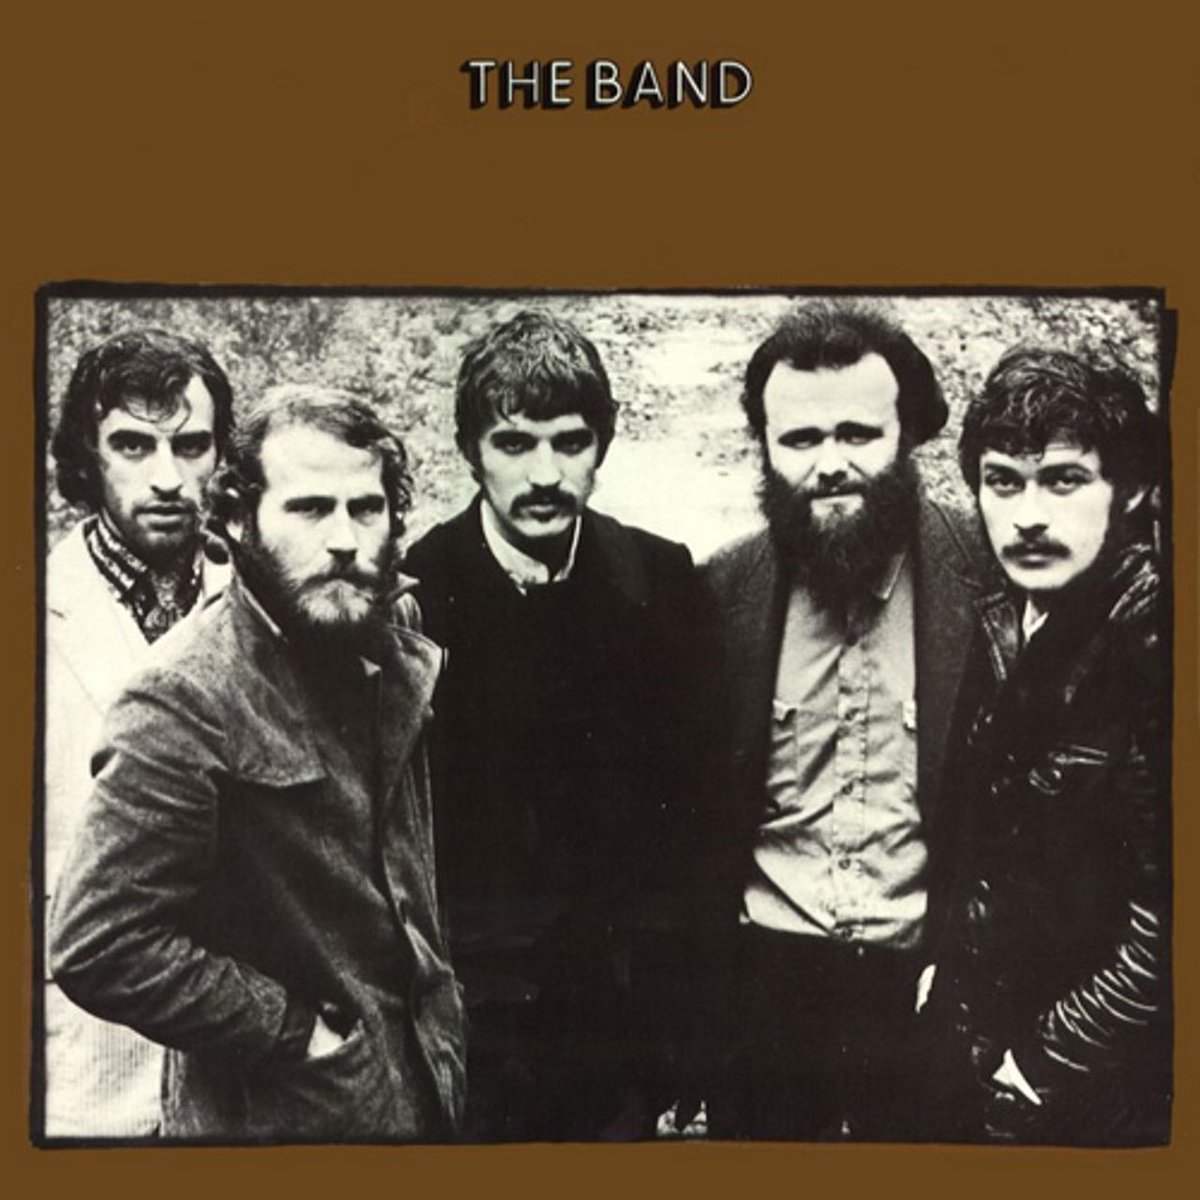 We’re excited to join the fabulous Longplayers for The Band’s 1969 album “The Band”. Saturday October 21, 2023 Tkts: @3rdandLindsley @PlayersLong #longplayers #TheBand #garrytallent #delevantes